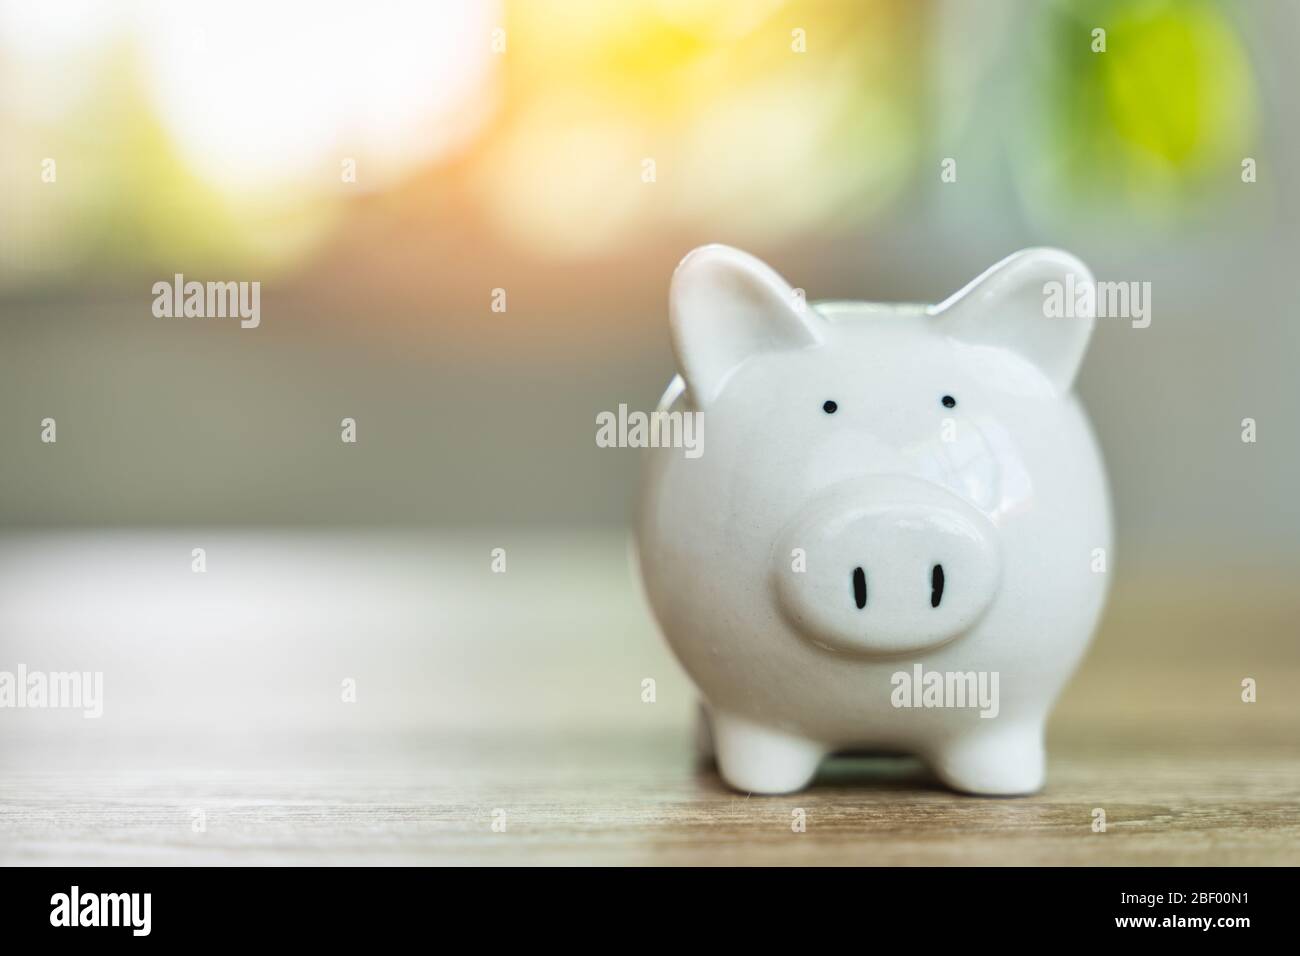 Money savings concepts Piggy bank symbol of saving money on wooden table with sunlight bokeh blur background and copy space Stock Photo